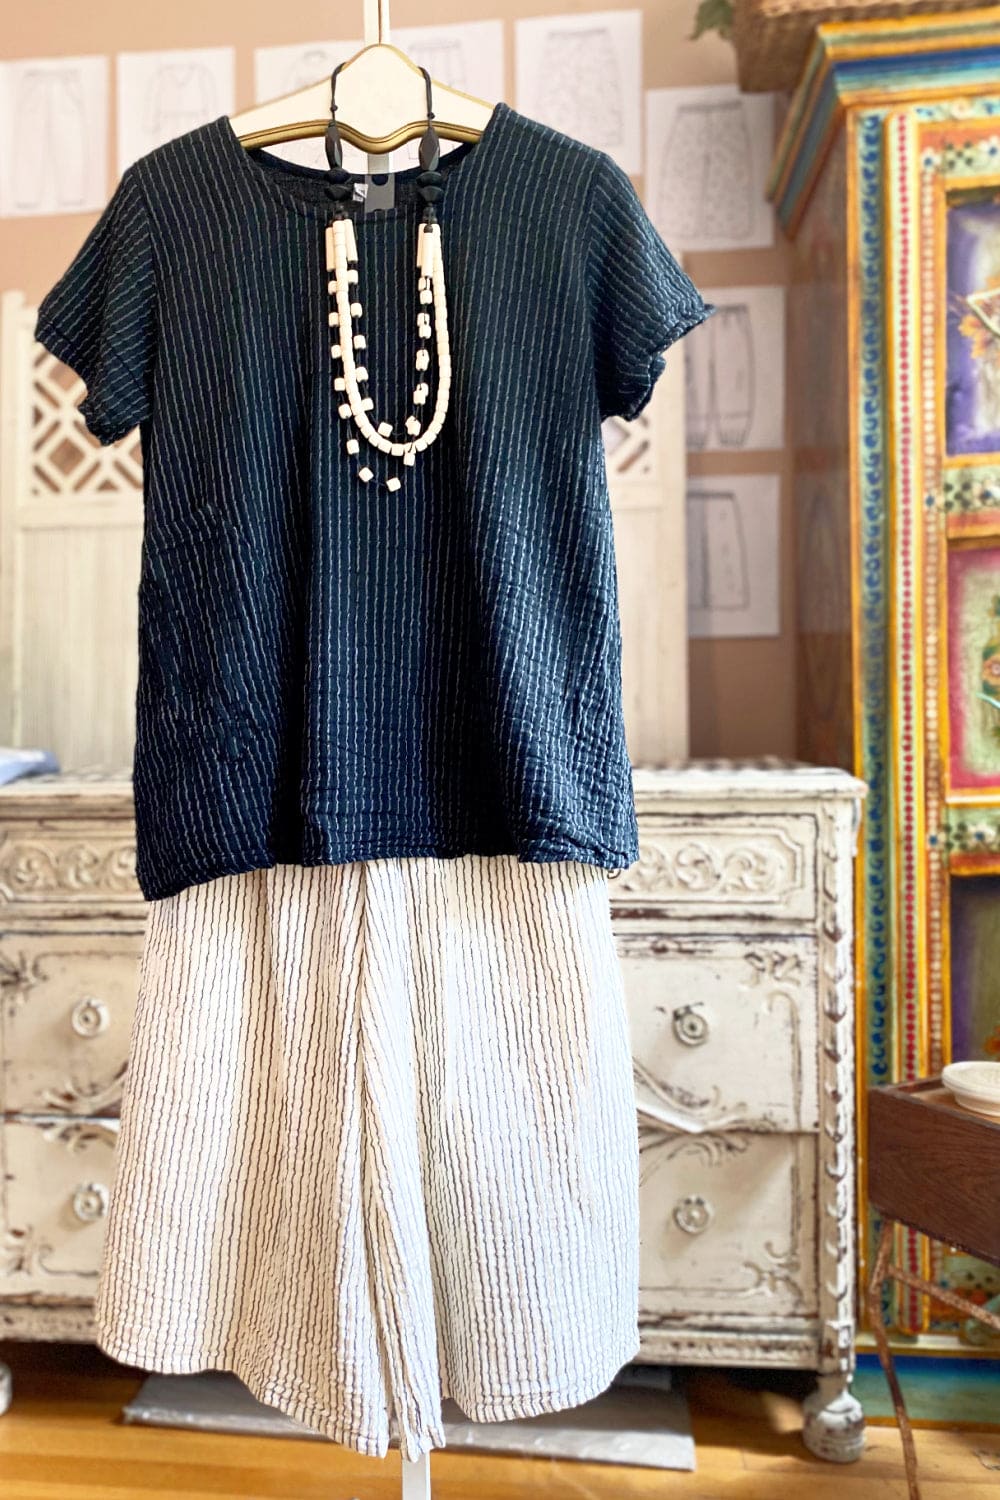 Women's short sleeve aline shaped cotton tee paired with full cut cotton creme pants and funky wooden necklace.